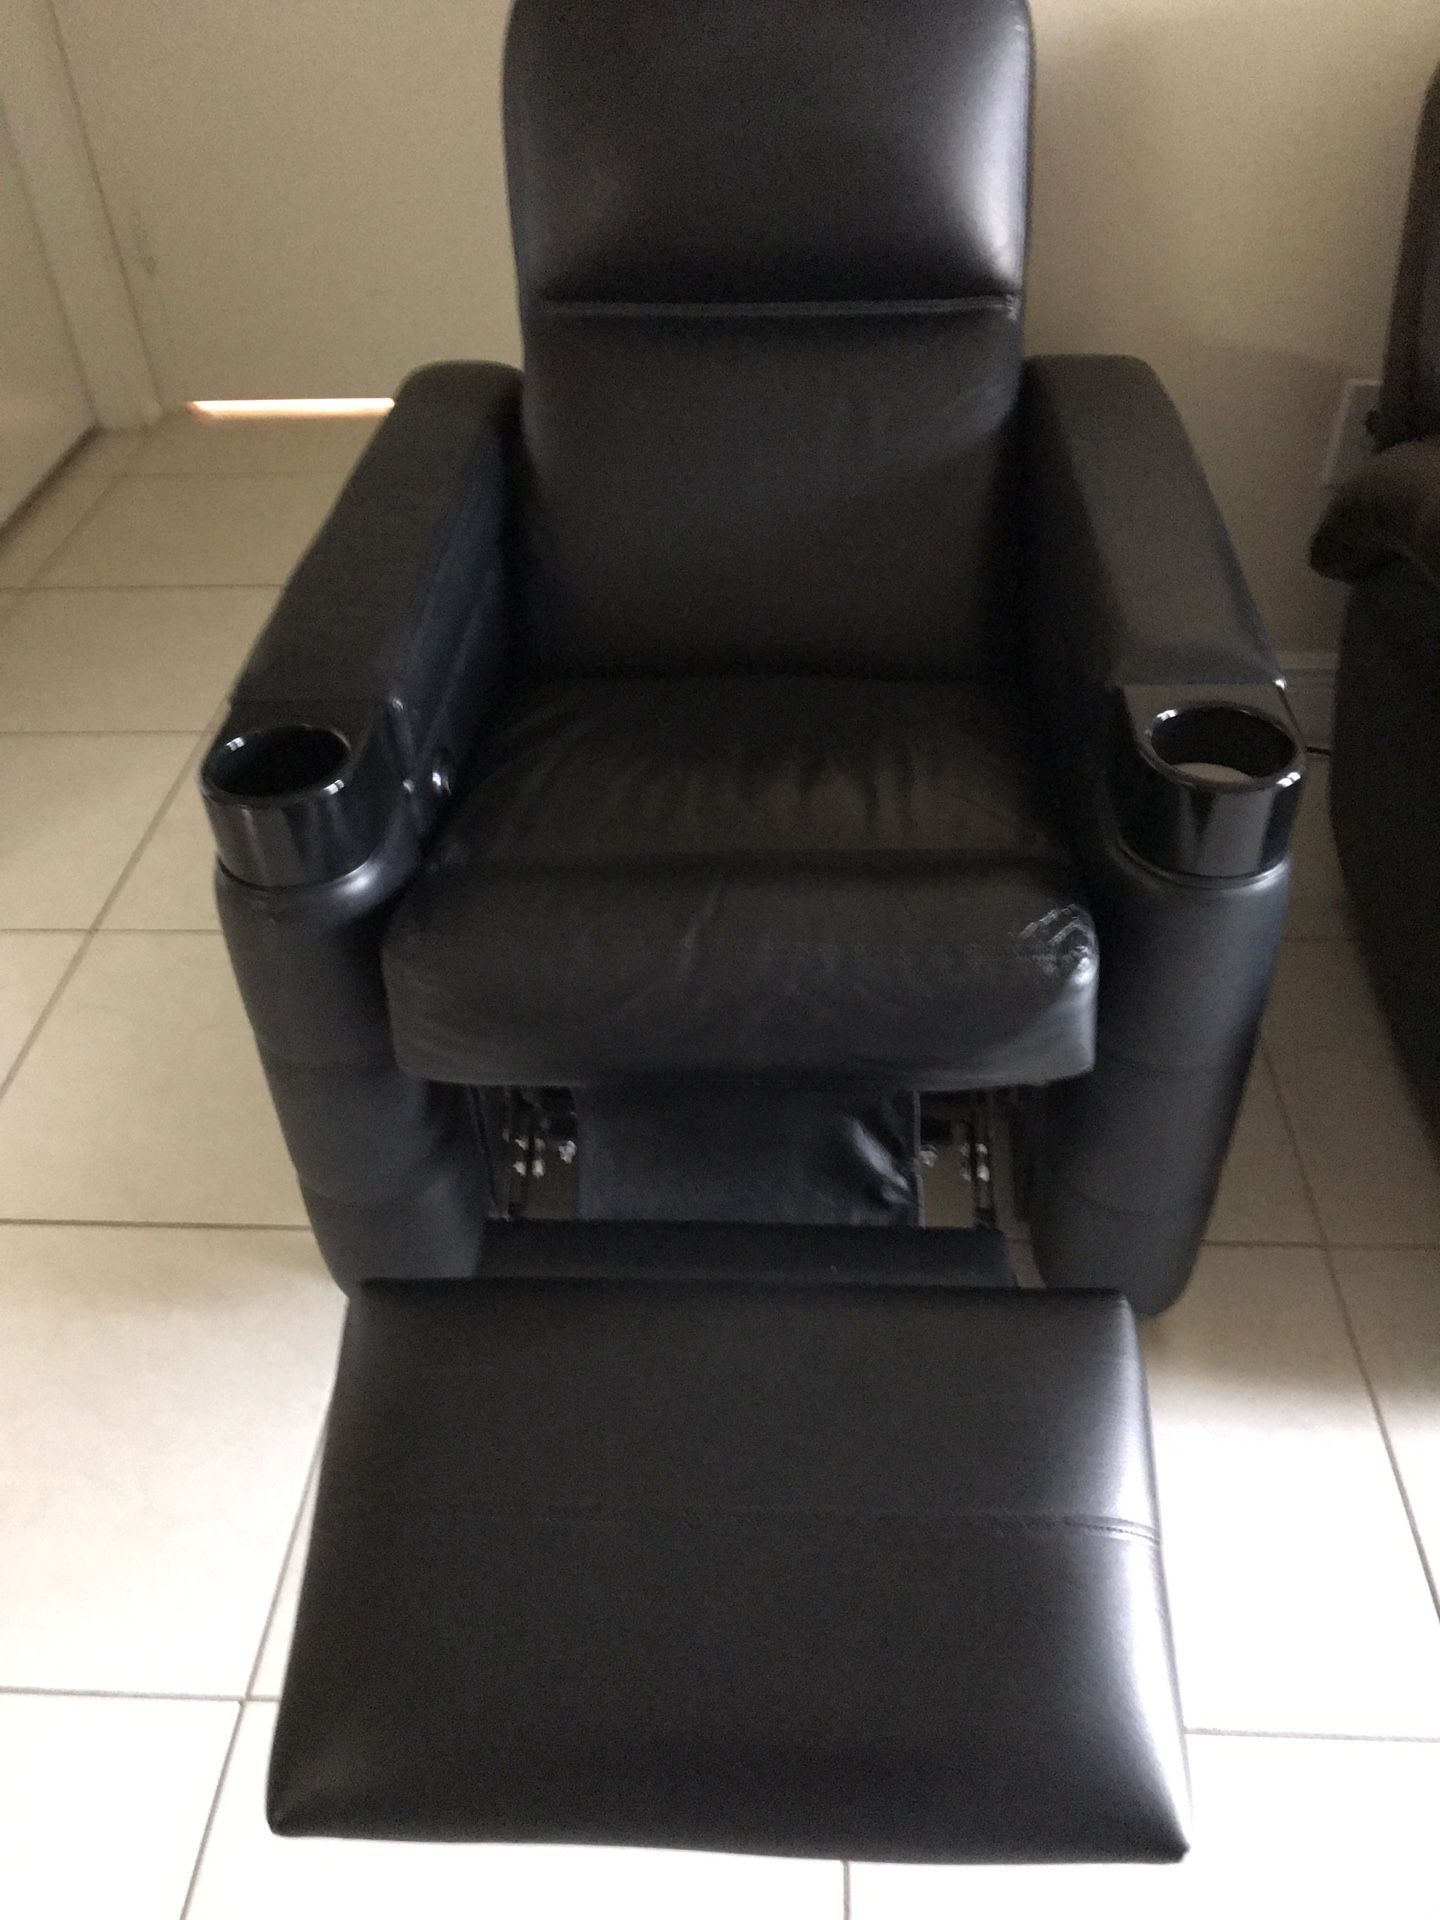 Electric recliner chair in excellent condition $150